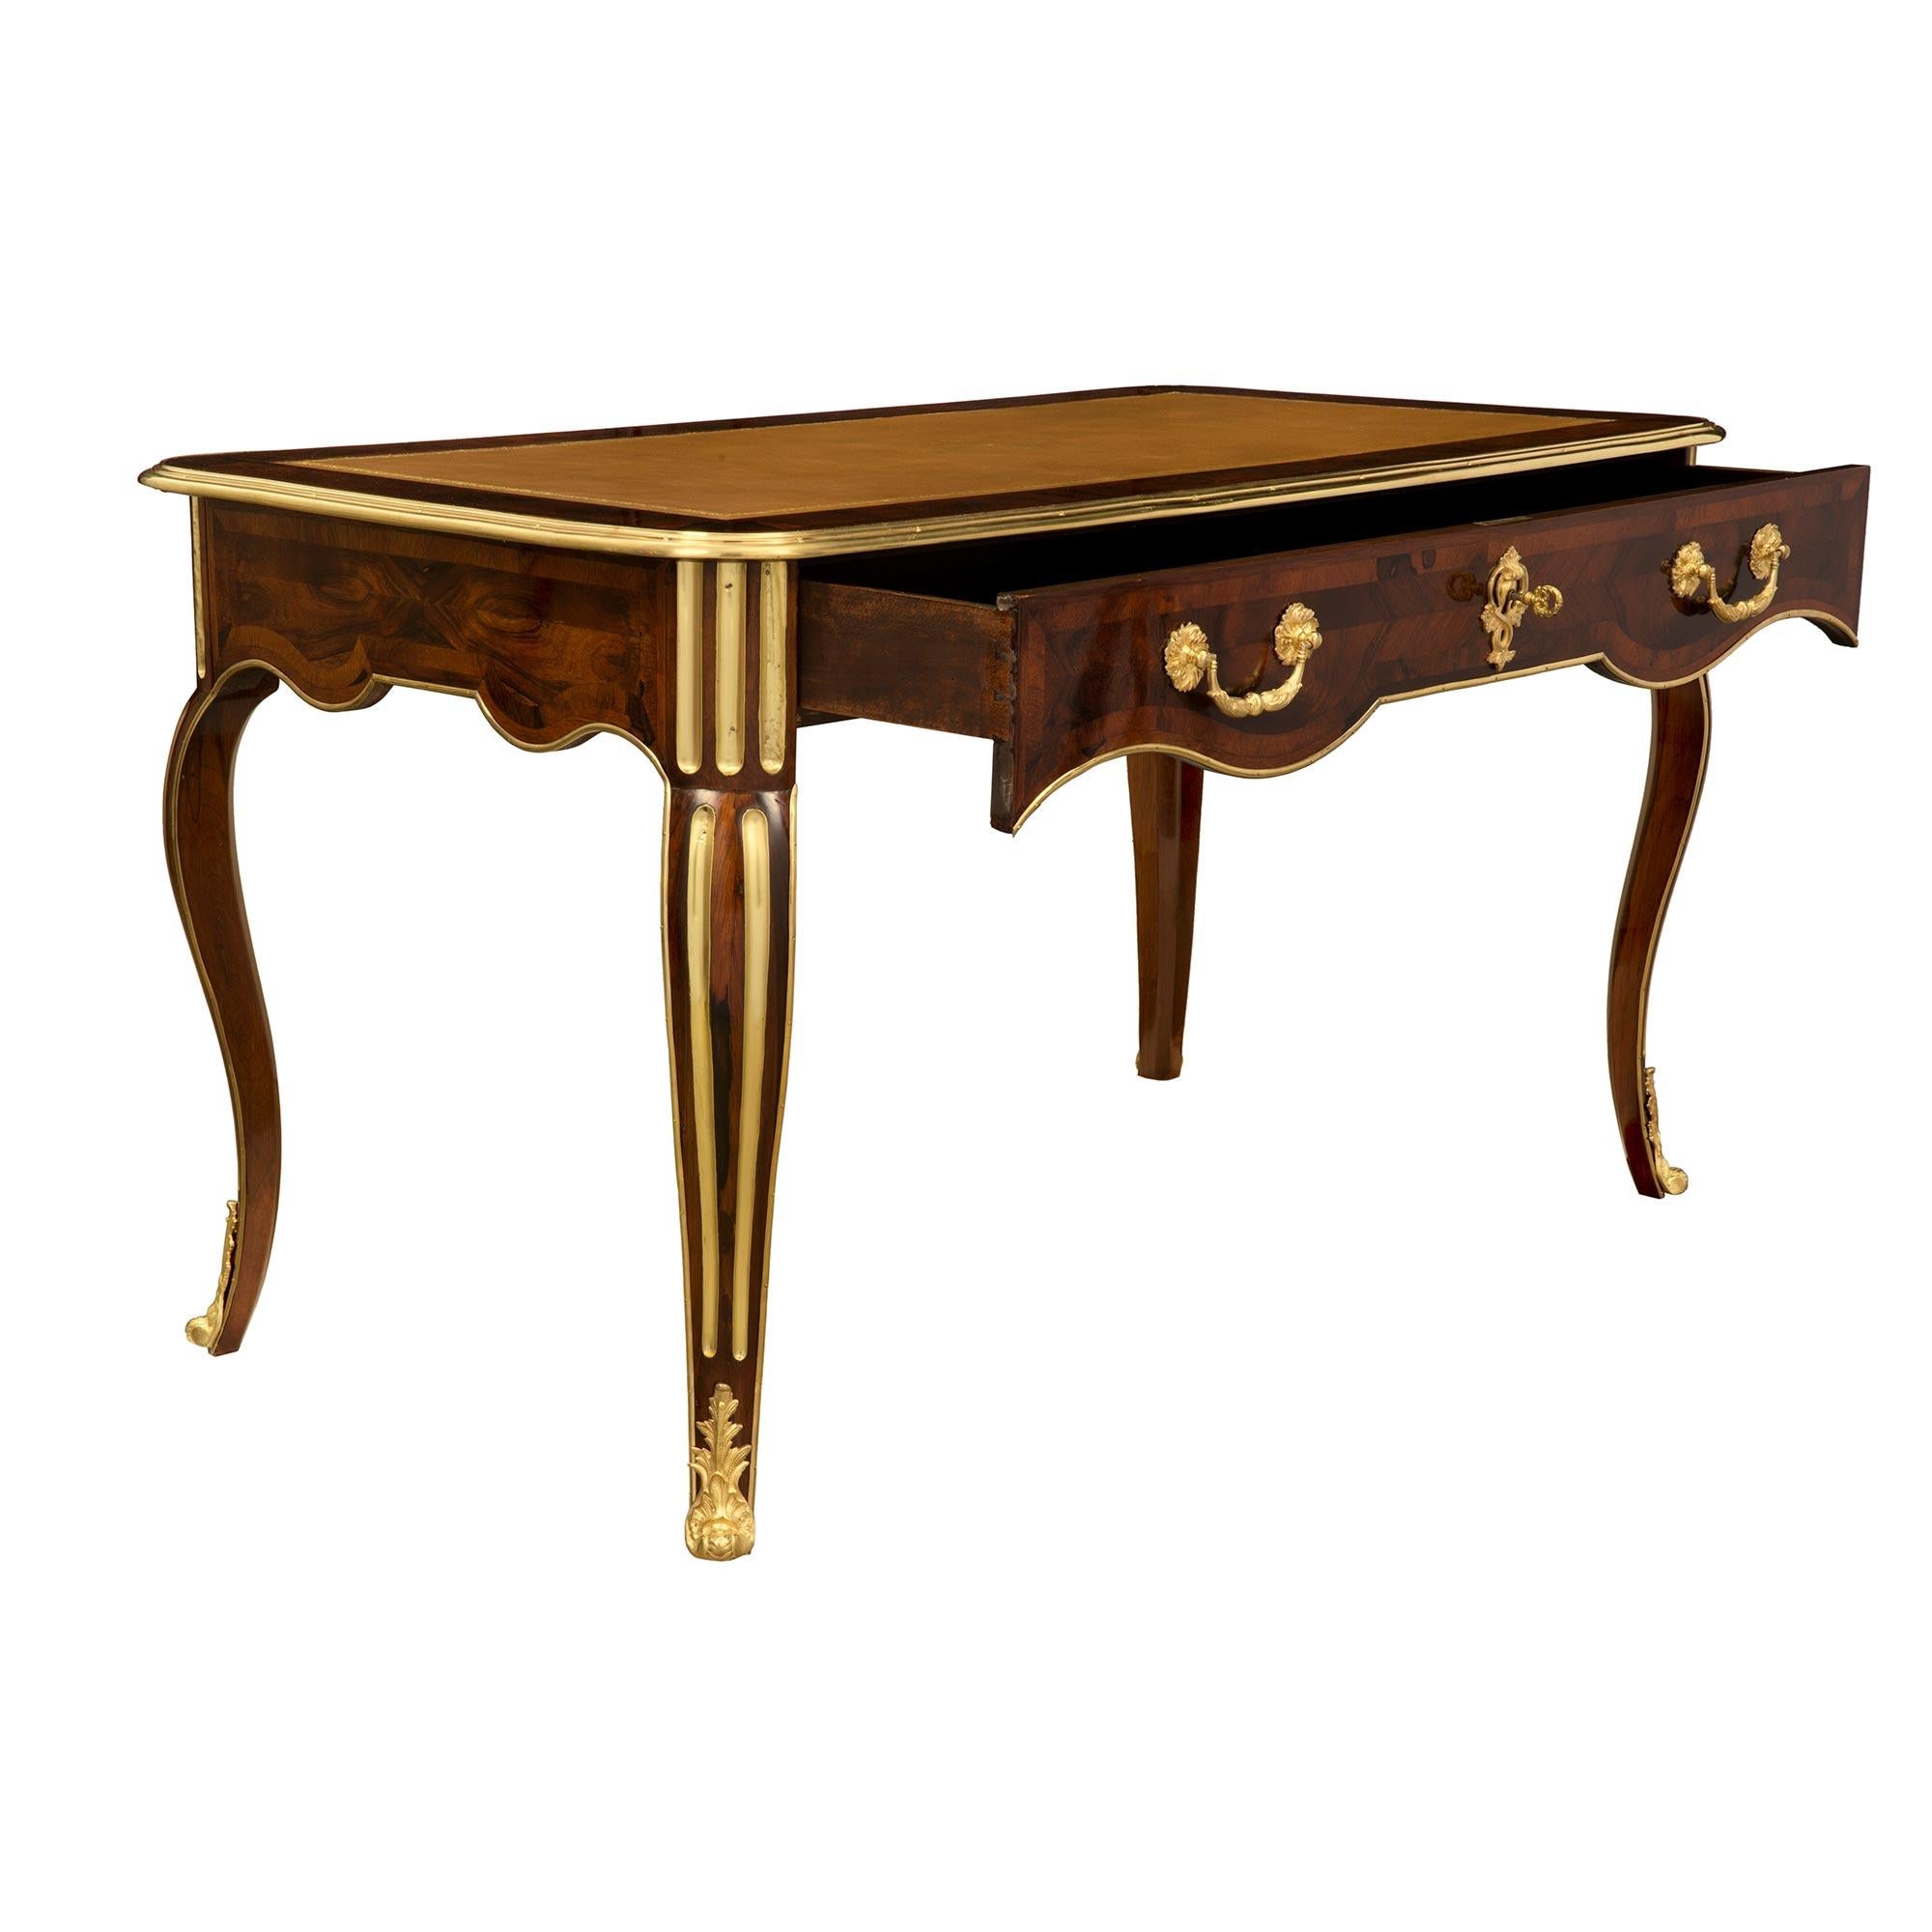 French 19th Century Regence Style Rosewood, Ormolu and Brass Desk For Sale 1